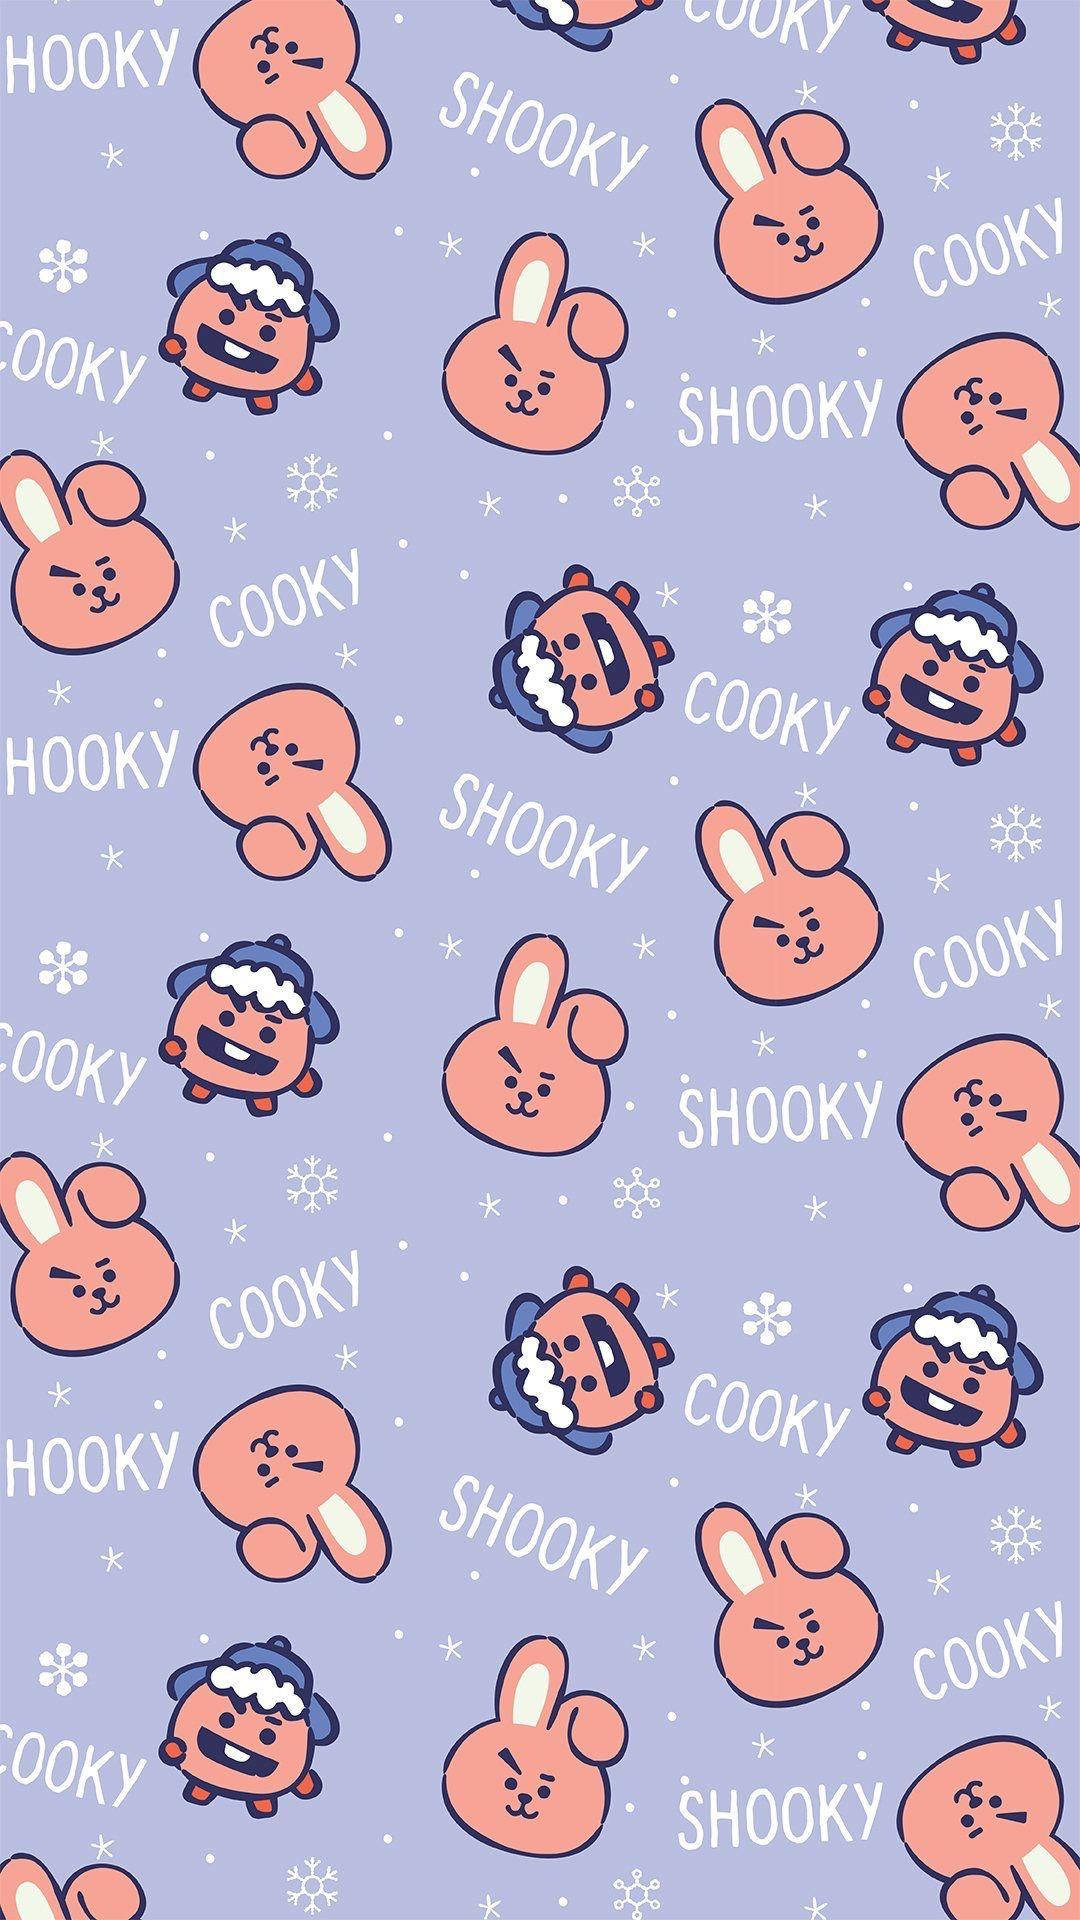 Cooky Bt21 With Shooky Poster